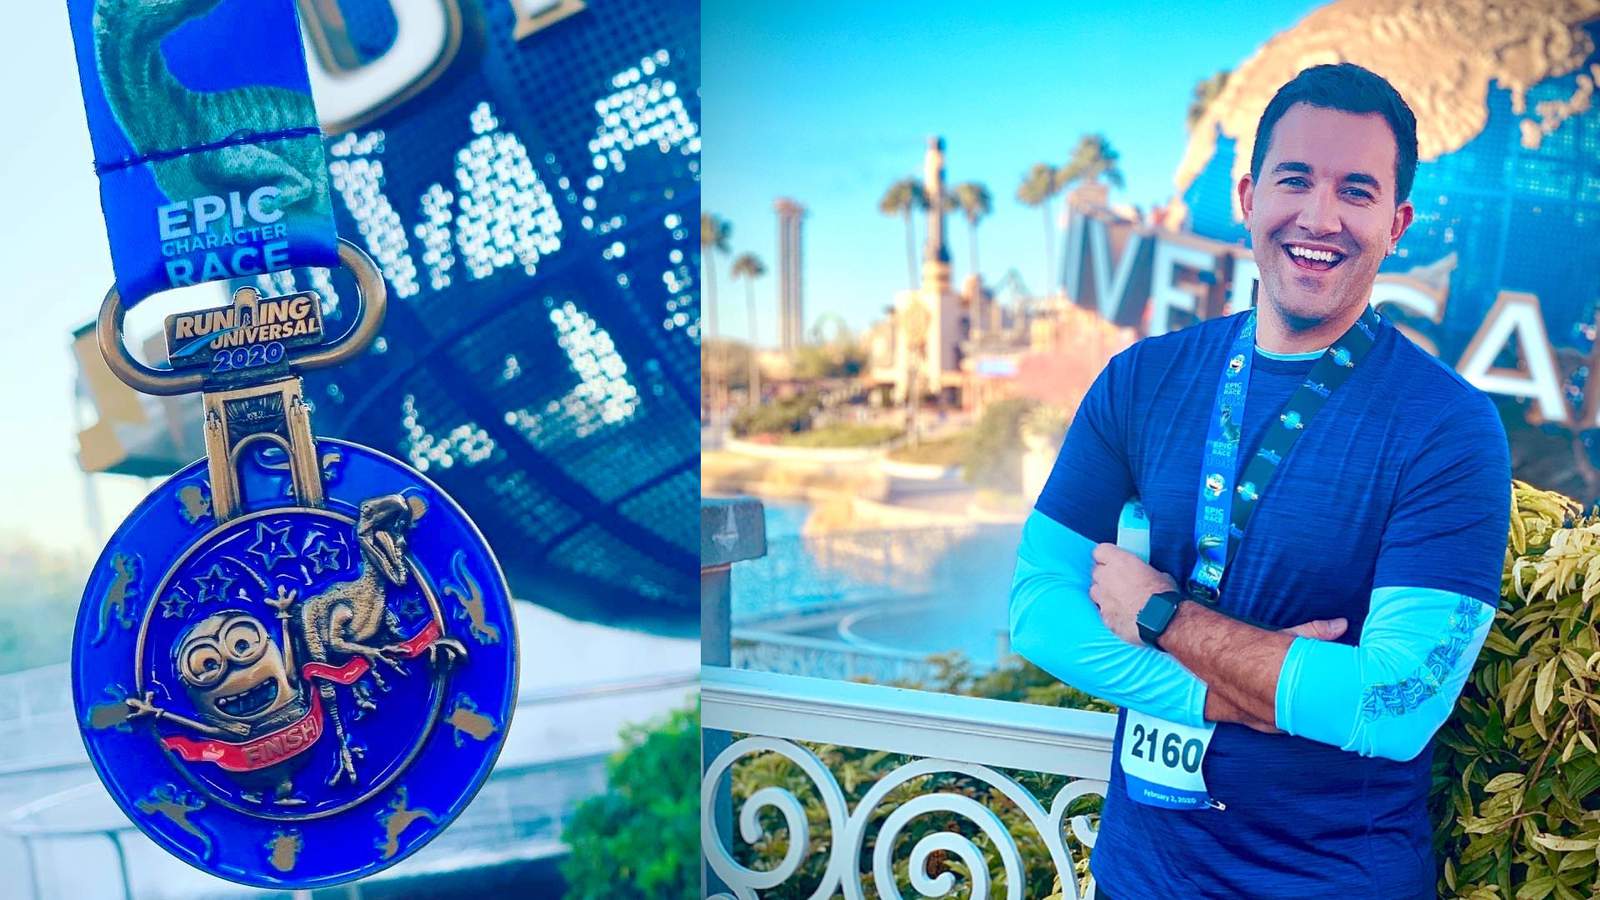 A totally ‘epic’ experience: Universal Orlando rolls out the red carpet for 5K and 10K races